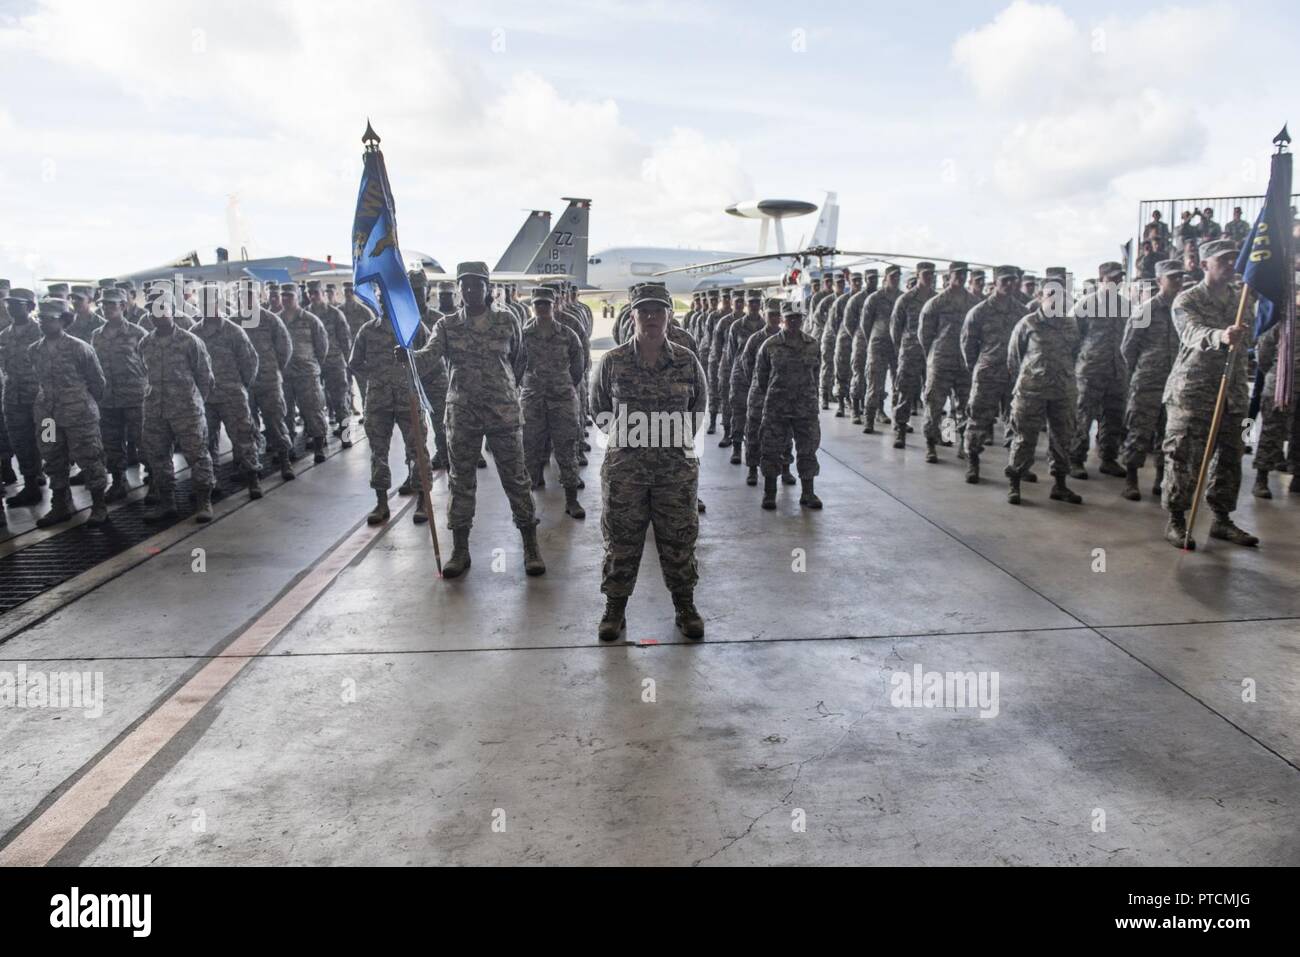 U.S. Airmen from the 18th Wing stand in formation during the 18th Wing change of command ceremony July 10, 2017 at Kadena Air Base, Japan. The change of command is a traditional military ceremony in which the departing commander assembles troops for presentation to the incoming commander. Stock Photo